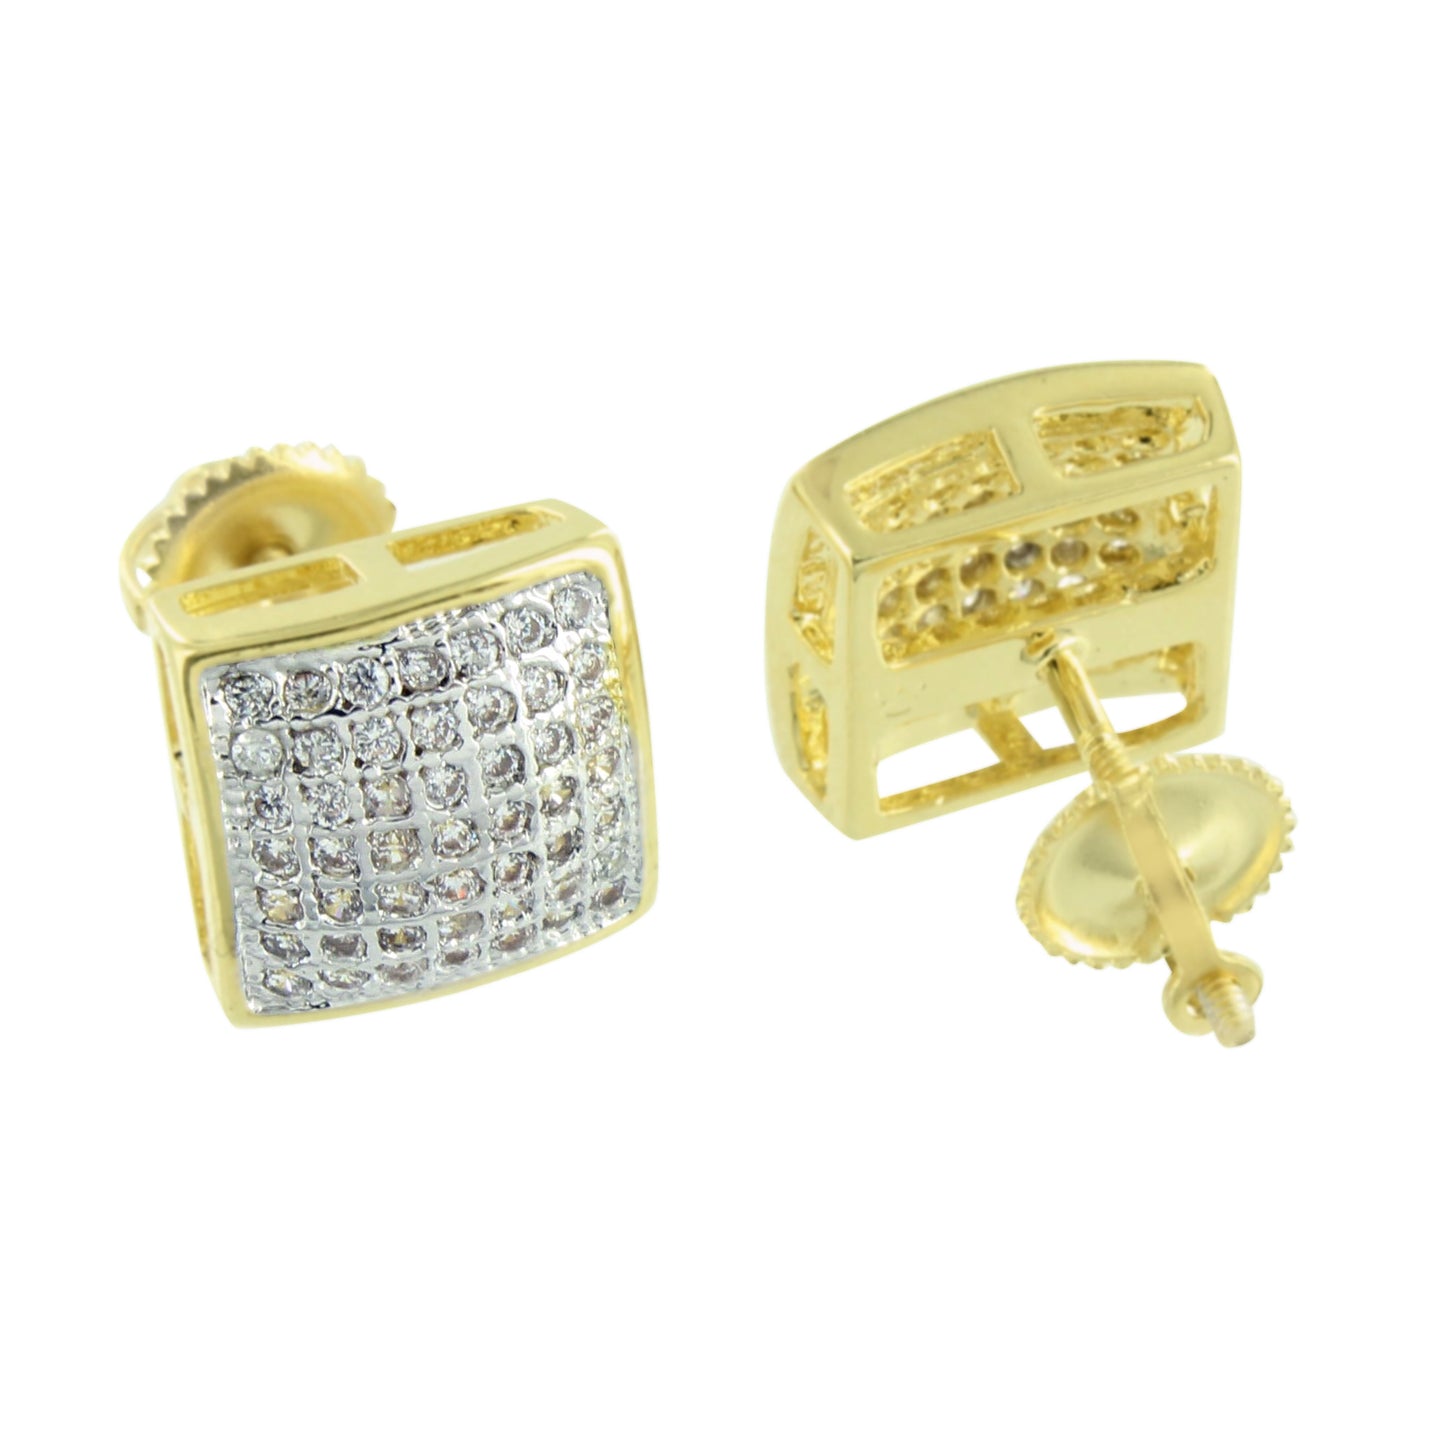 Square Shape Earrings Yellow Gold Finish Lab Created CZ Pave Set Screw Back